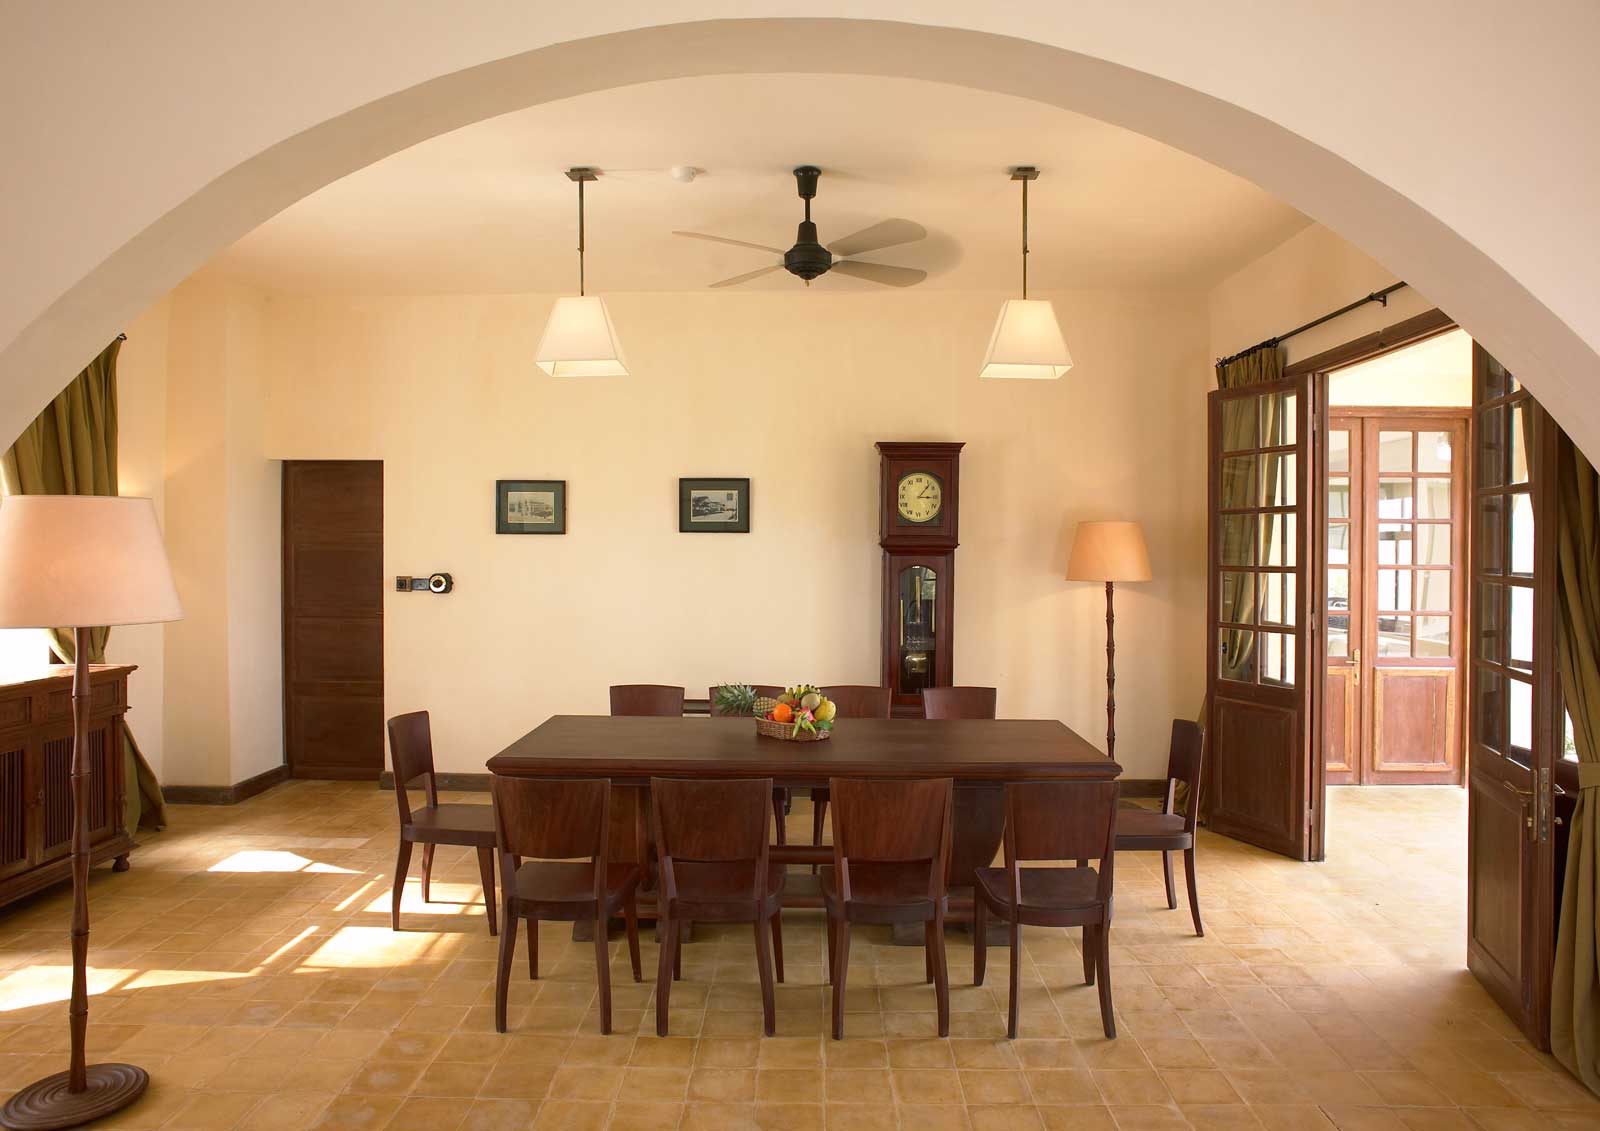 Dining Room Spanish Traditional Dining Room Ideas Decorating Spanish Flare For 10 Persons With Classy Chocolate Expanding Dining Table Design And Cute Pendant Lamps Idea Also Elegance Pastel Wall Paint Colors Design Dining Room The Best Simple Dining Room Ideas